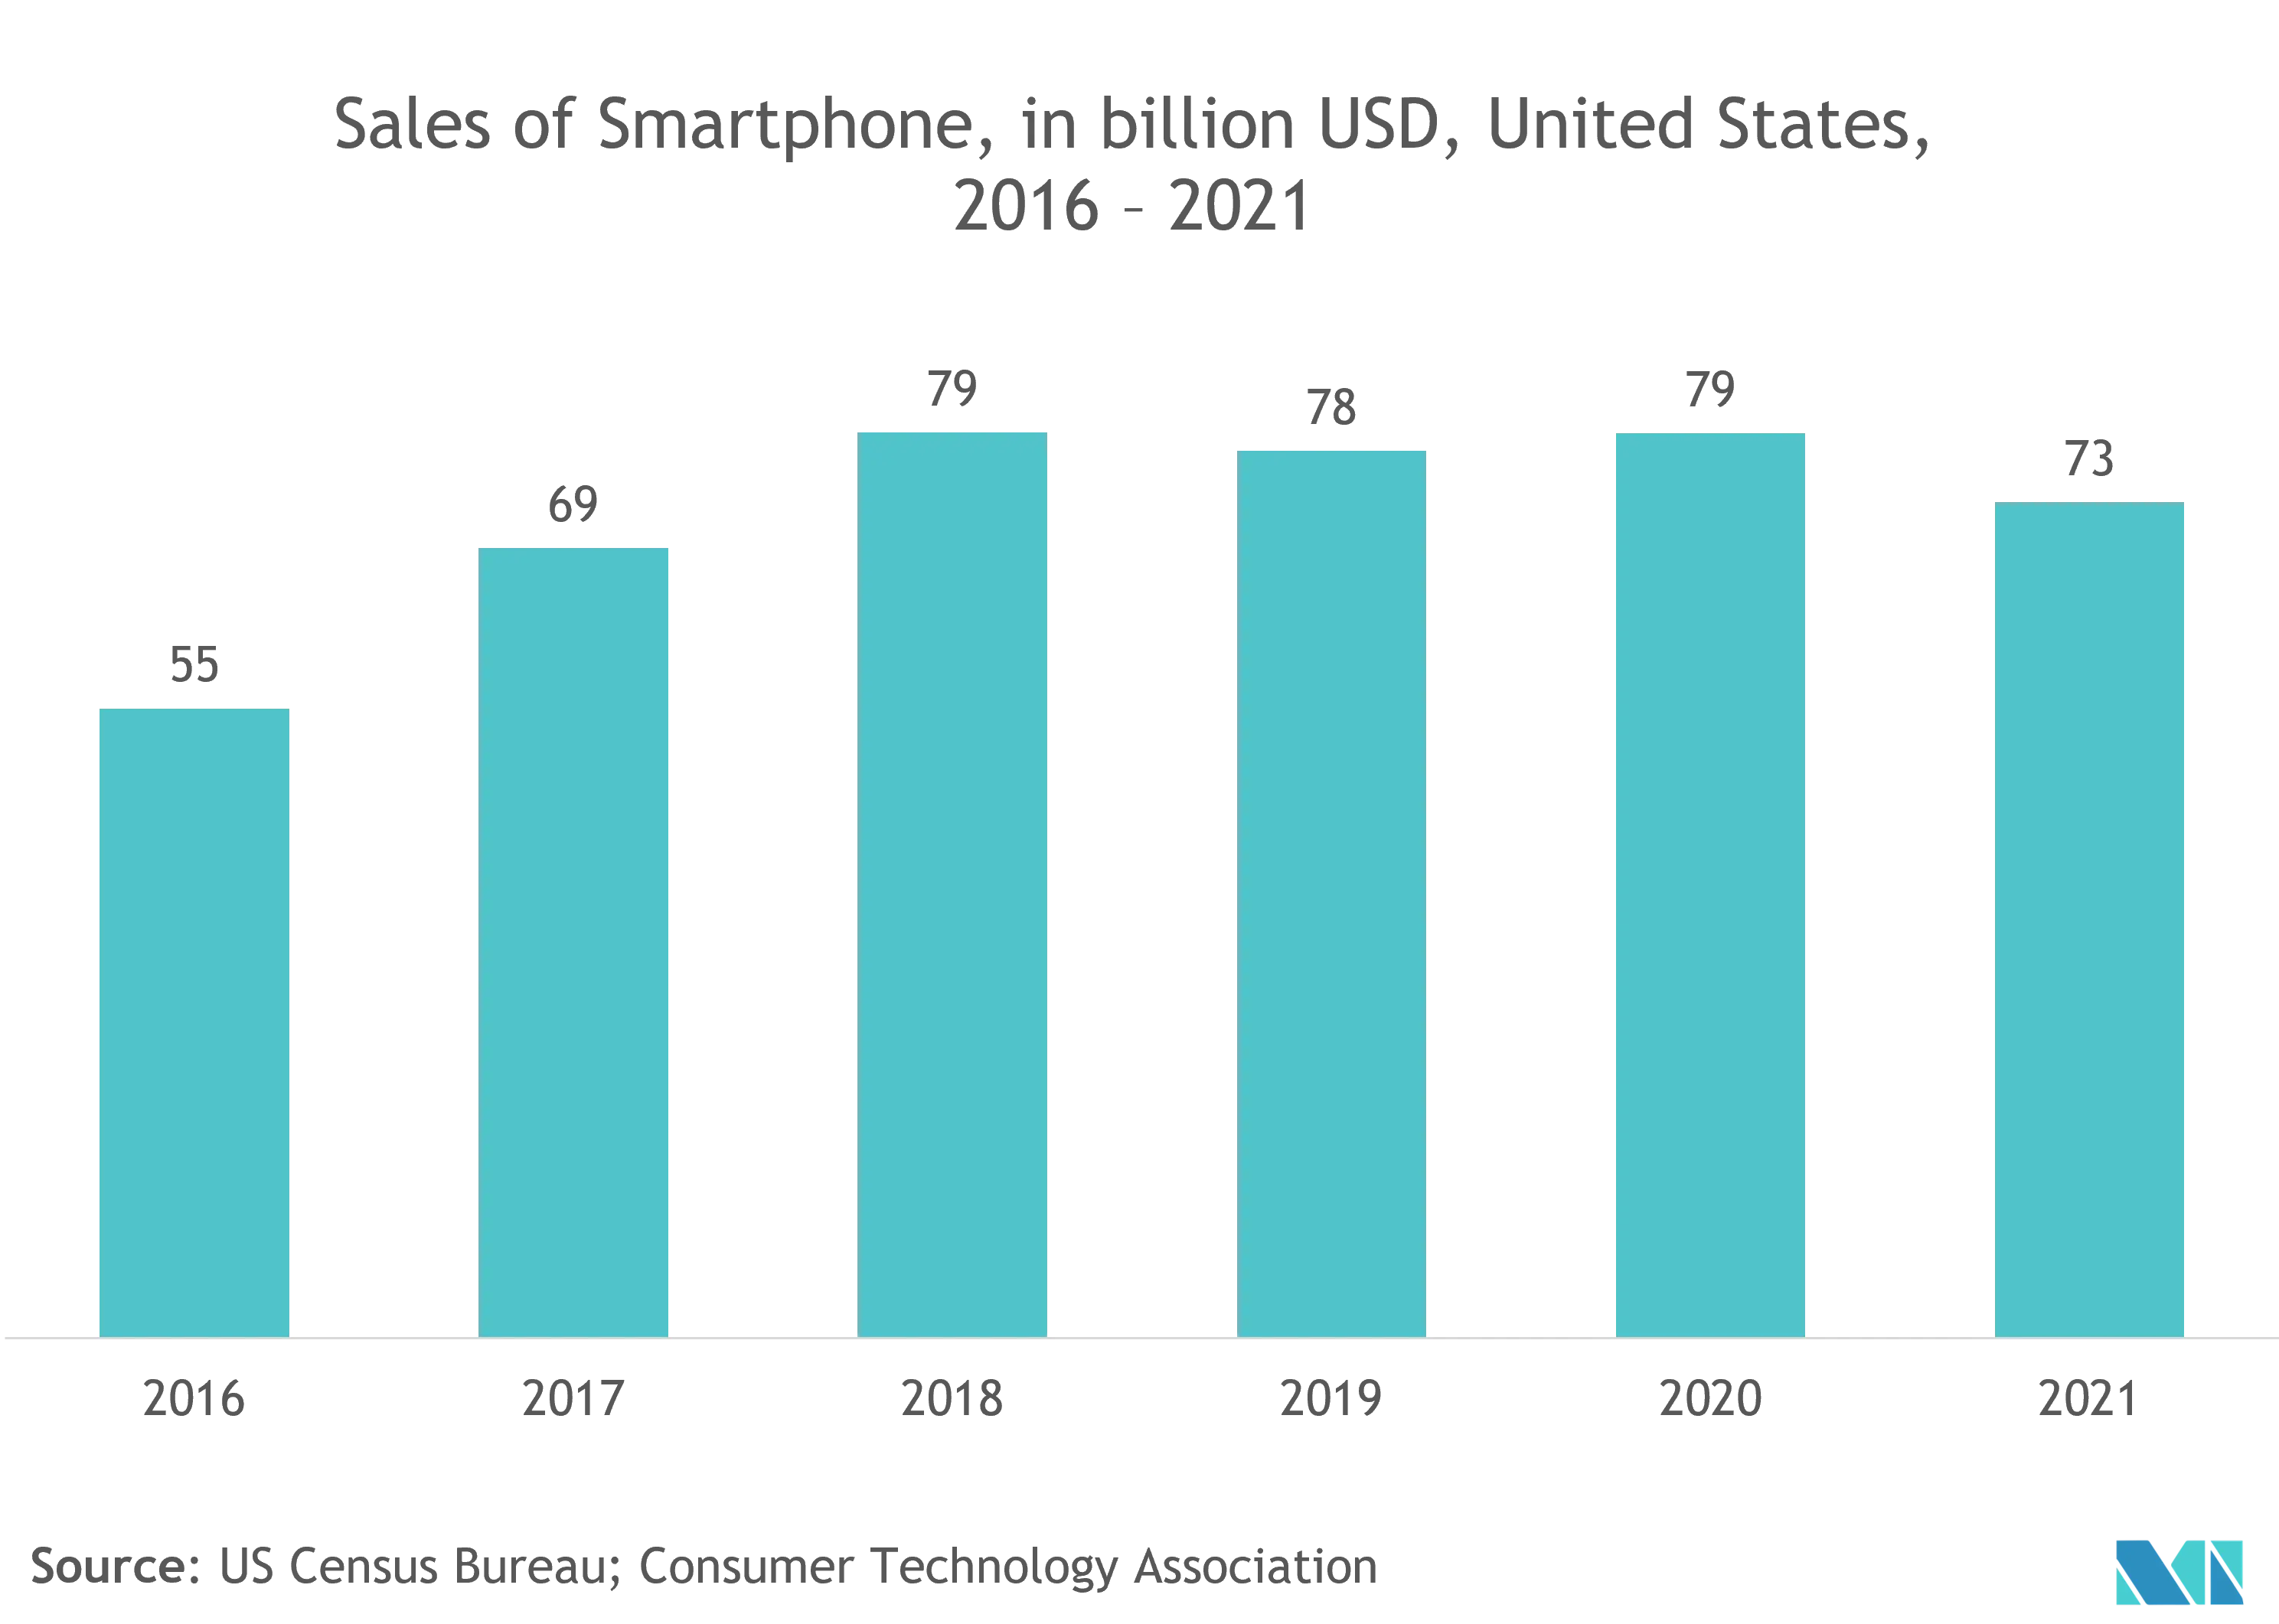 GNSS Chip Market : Sales of Smartphones, in million USD, United States 2016-2021